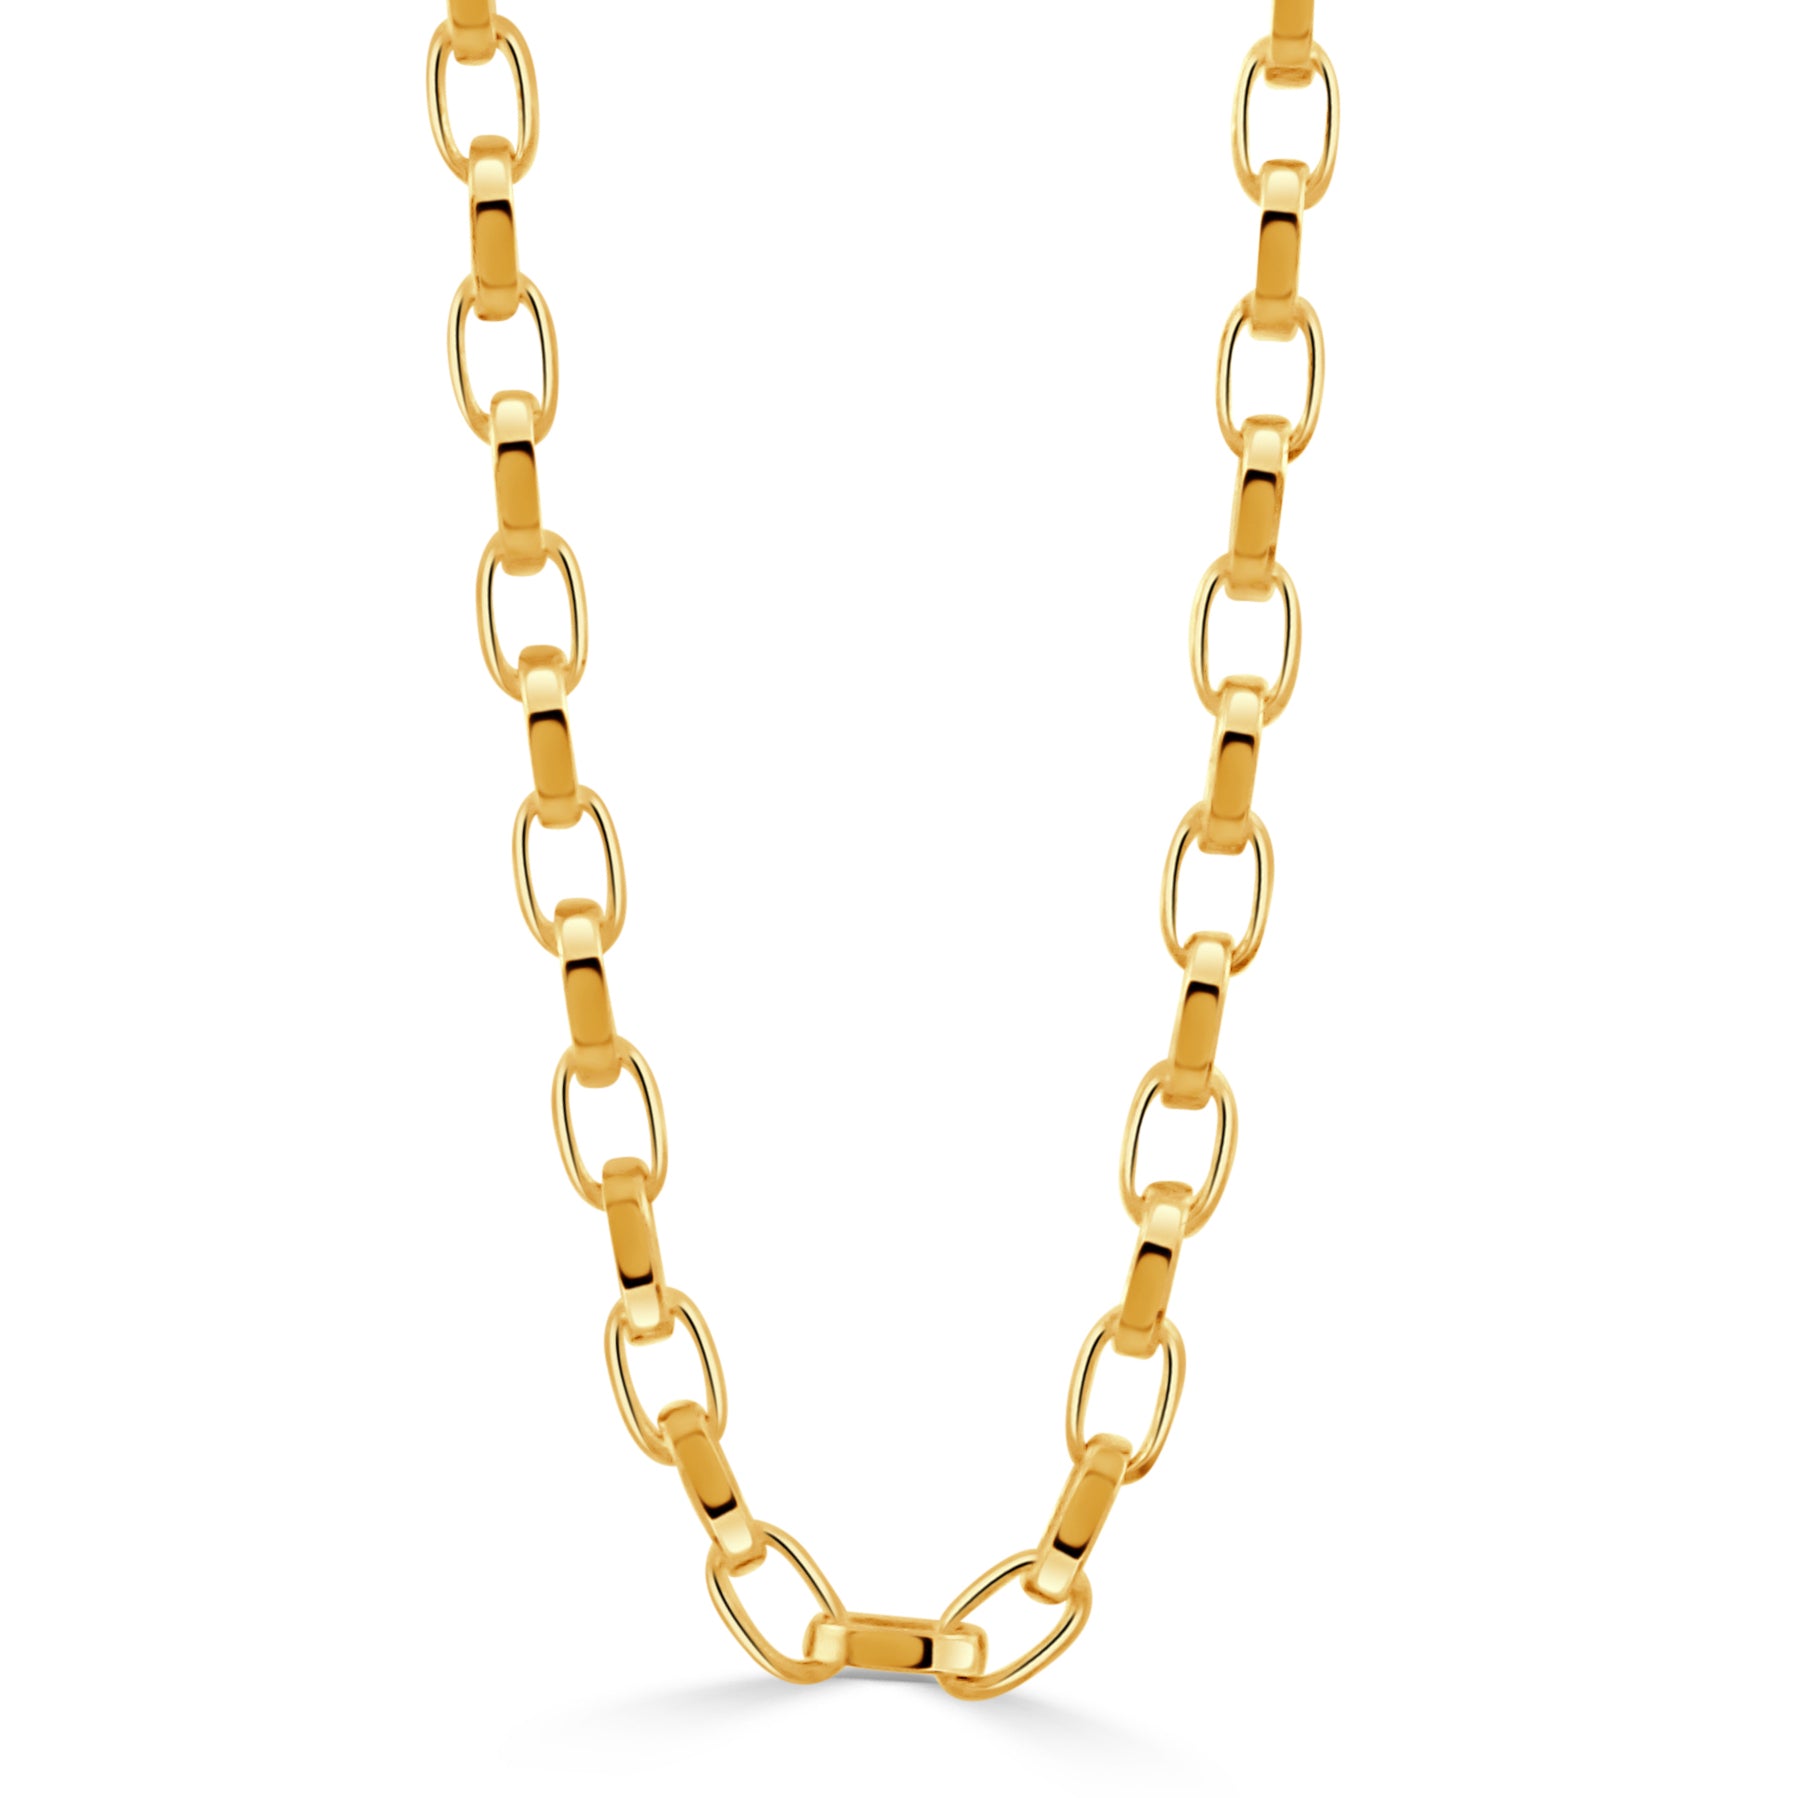 18K YELLOW GOLD LARGE LINK 18 INCH BOX CHAIN